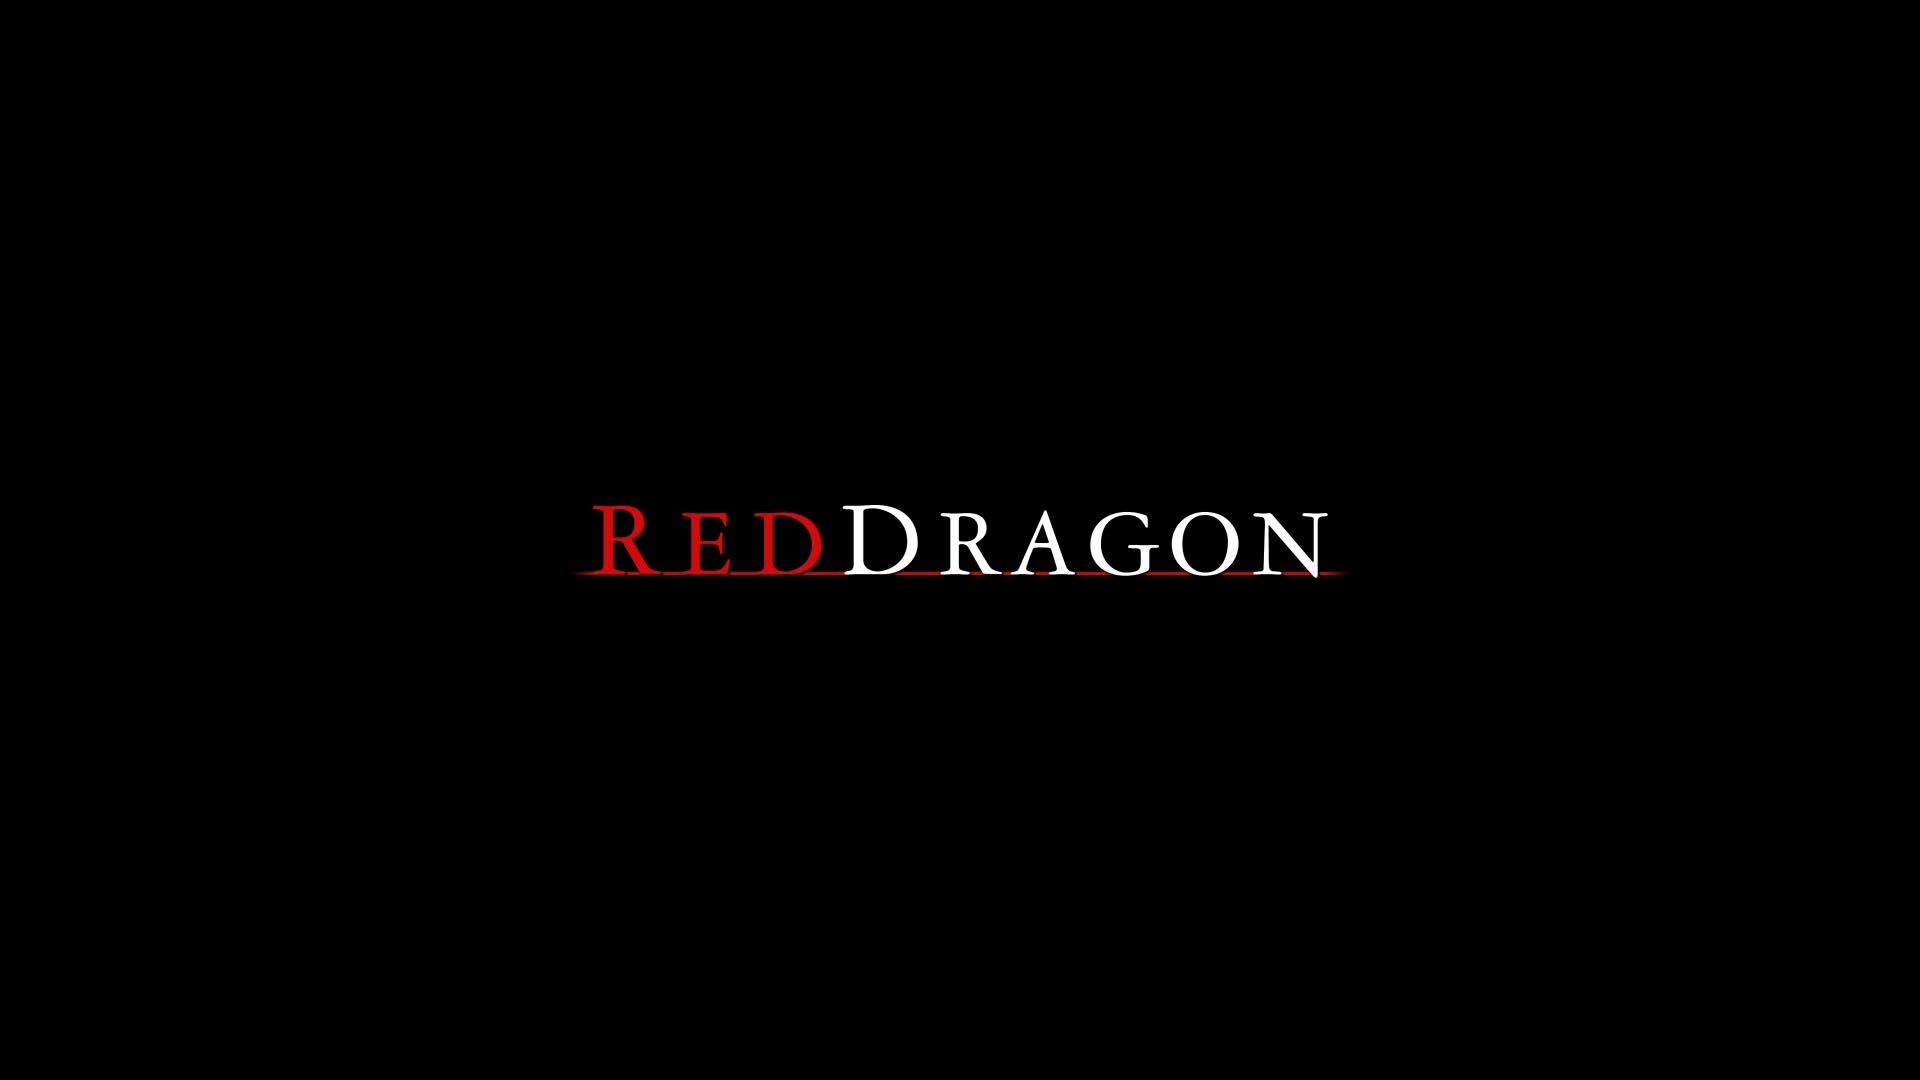 Movie Red Dragon HD Wallpaper | Background Image